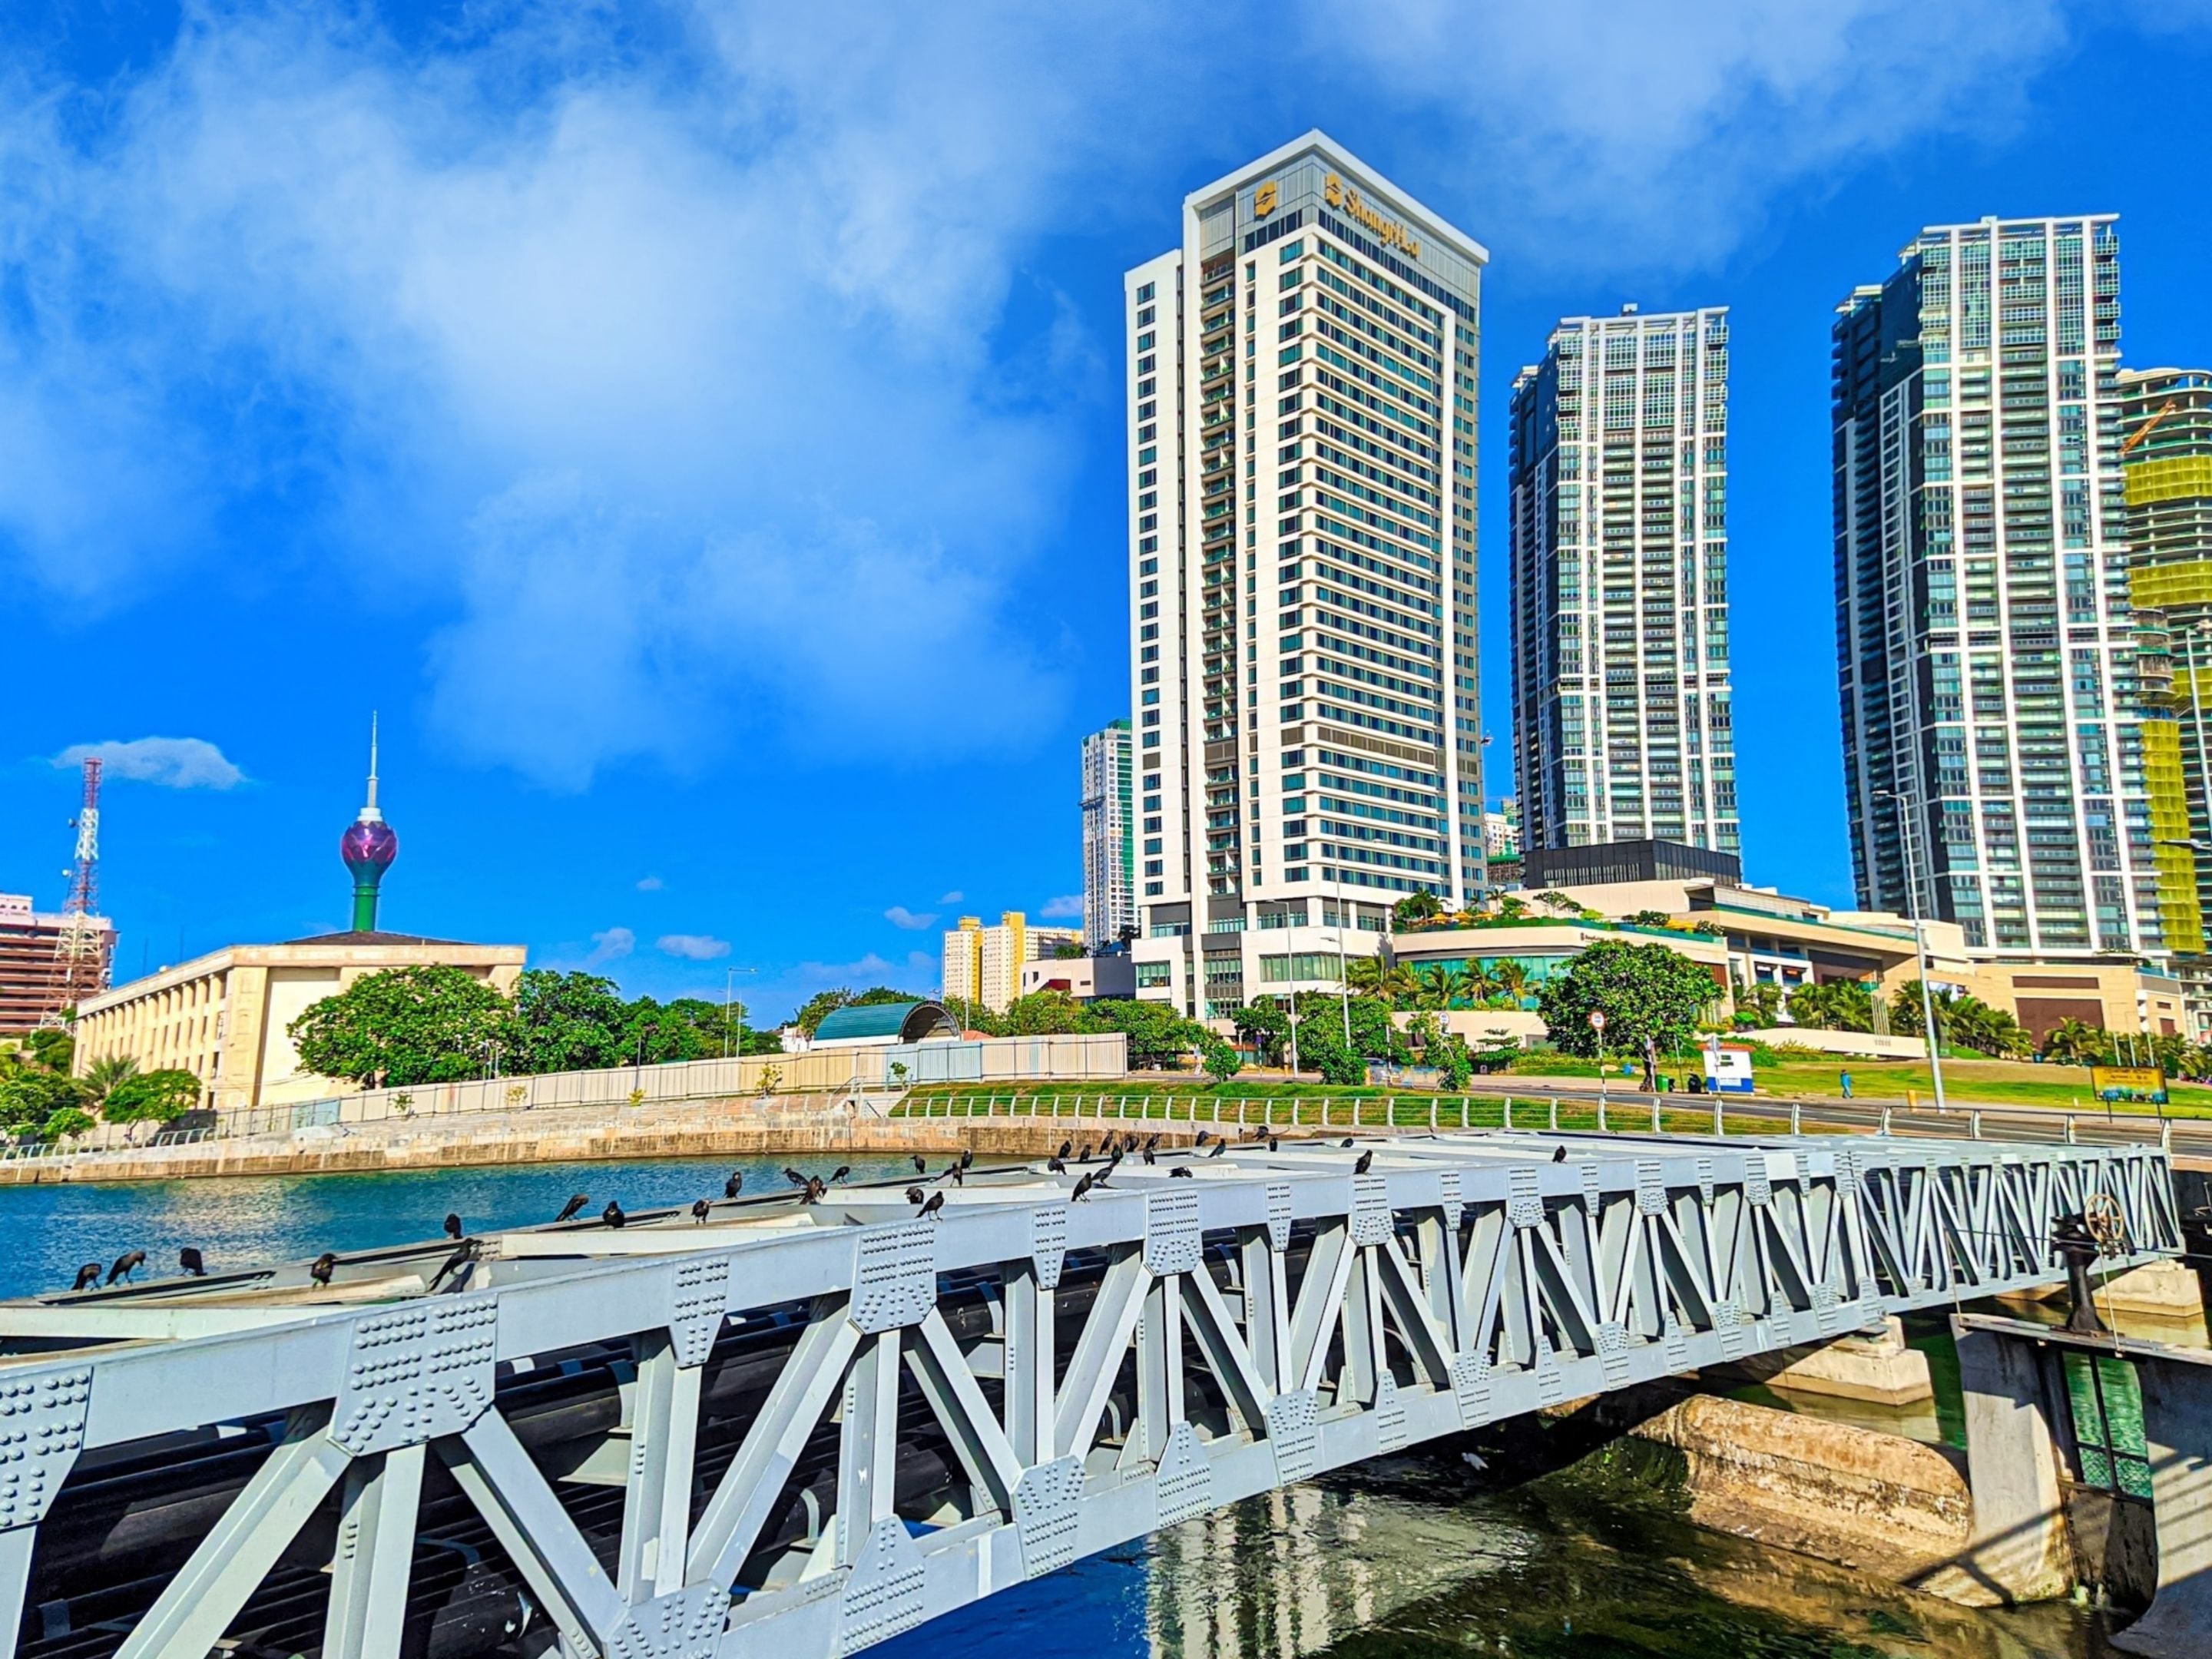 Image of city of Colombo Sri Lanka with bridge and tall buildings.